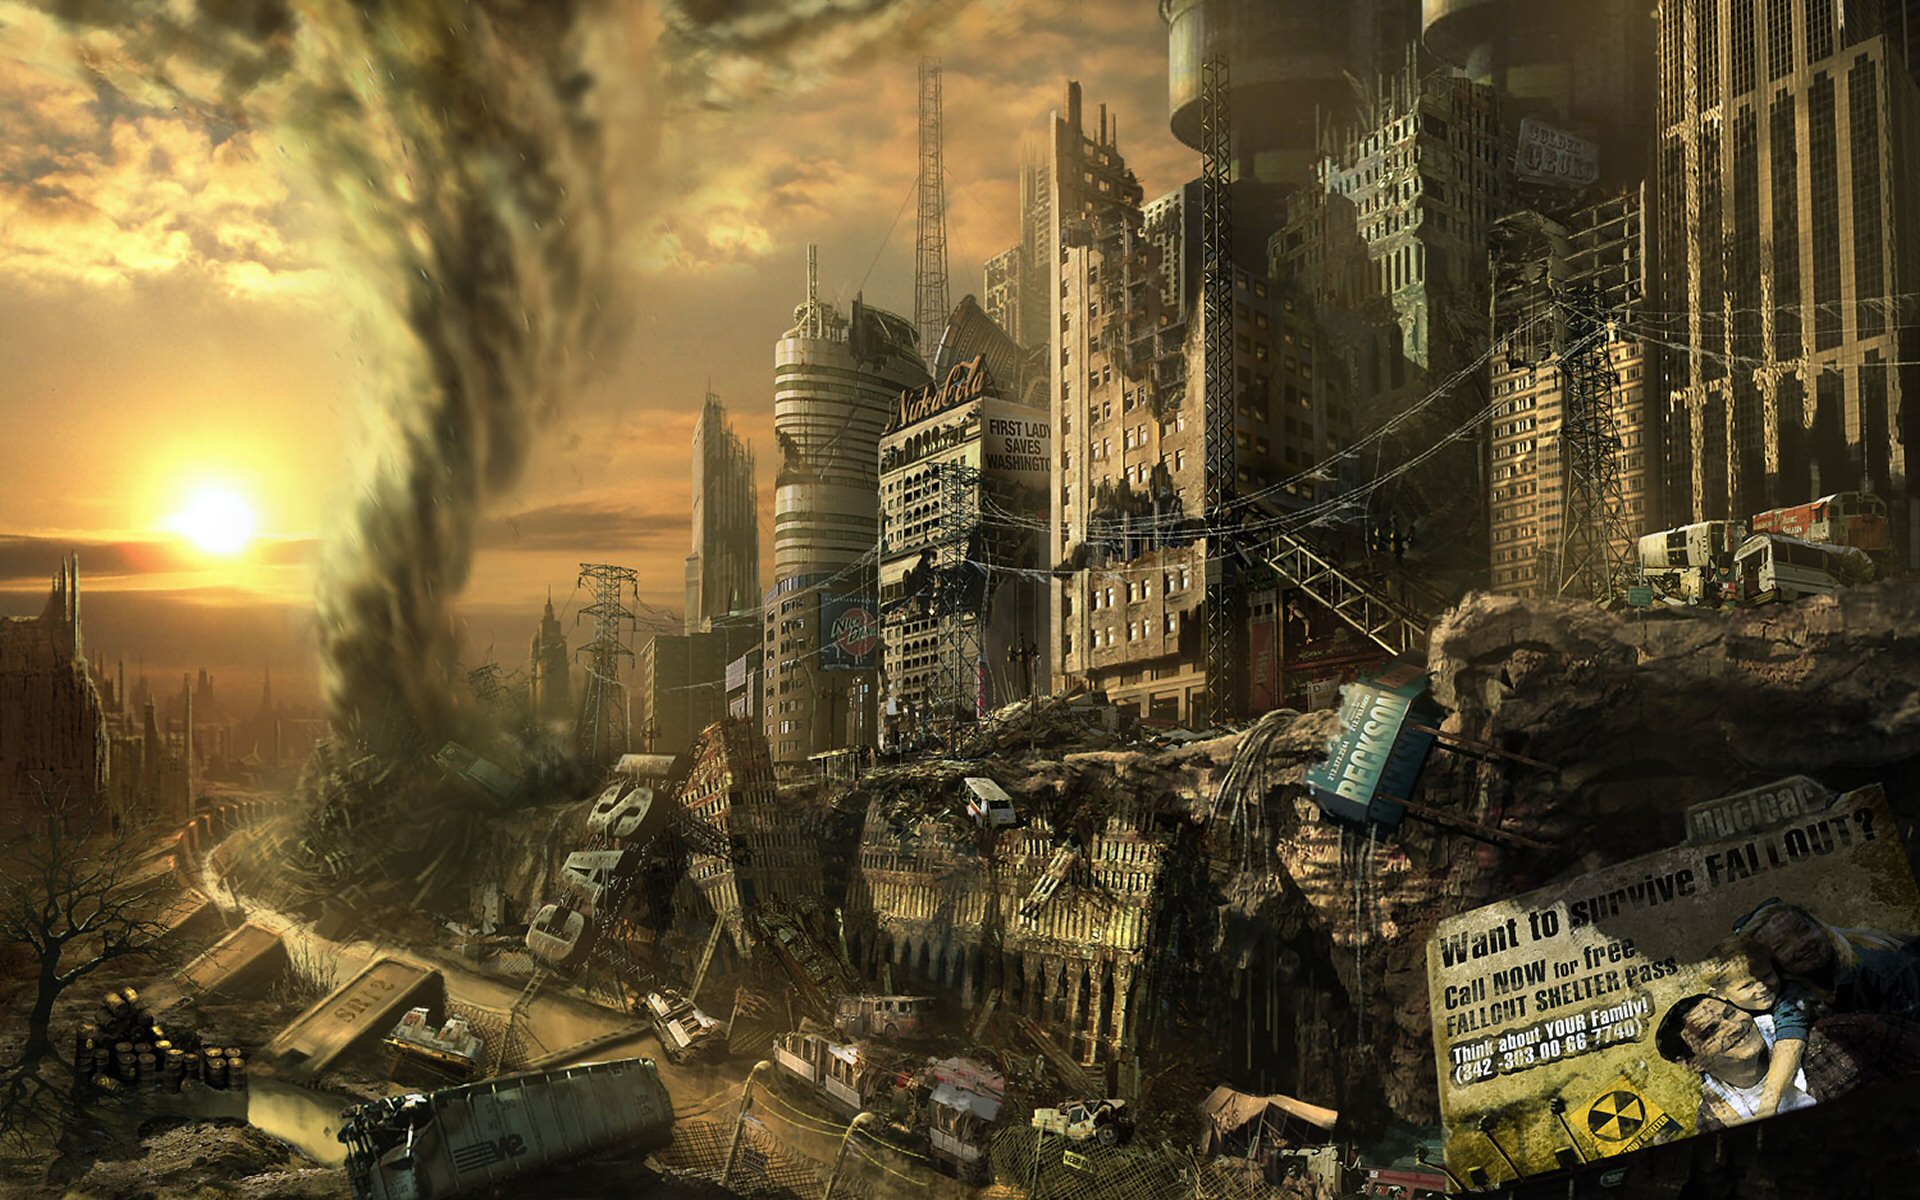 Fallout Guess Wallpaper Not All Futures